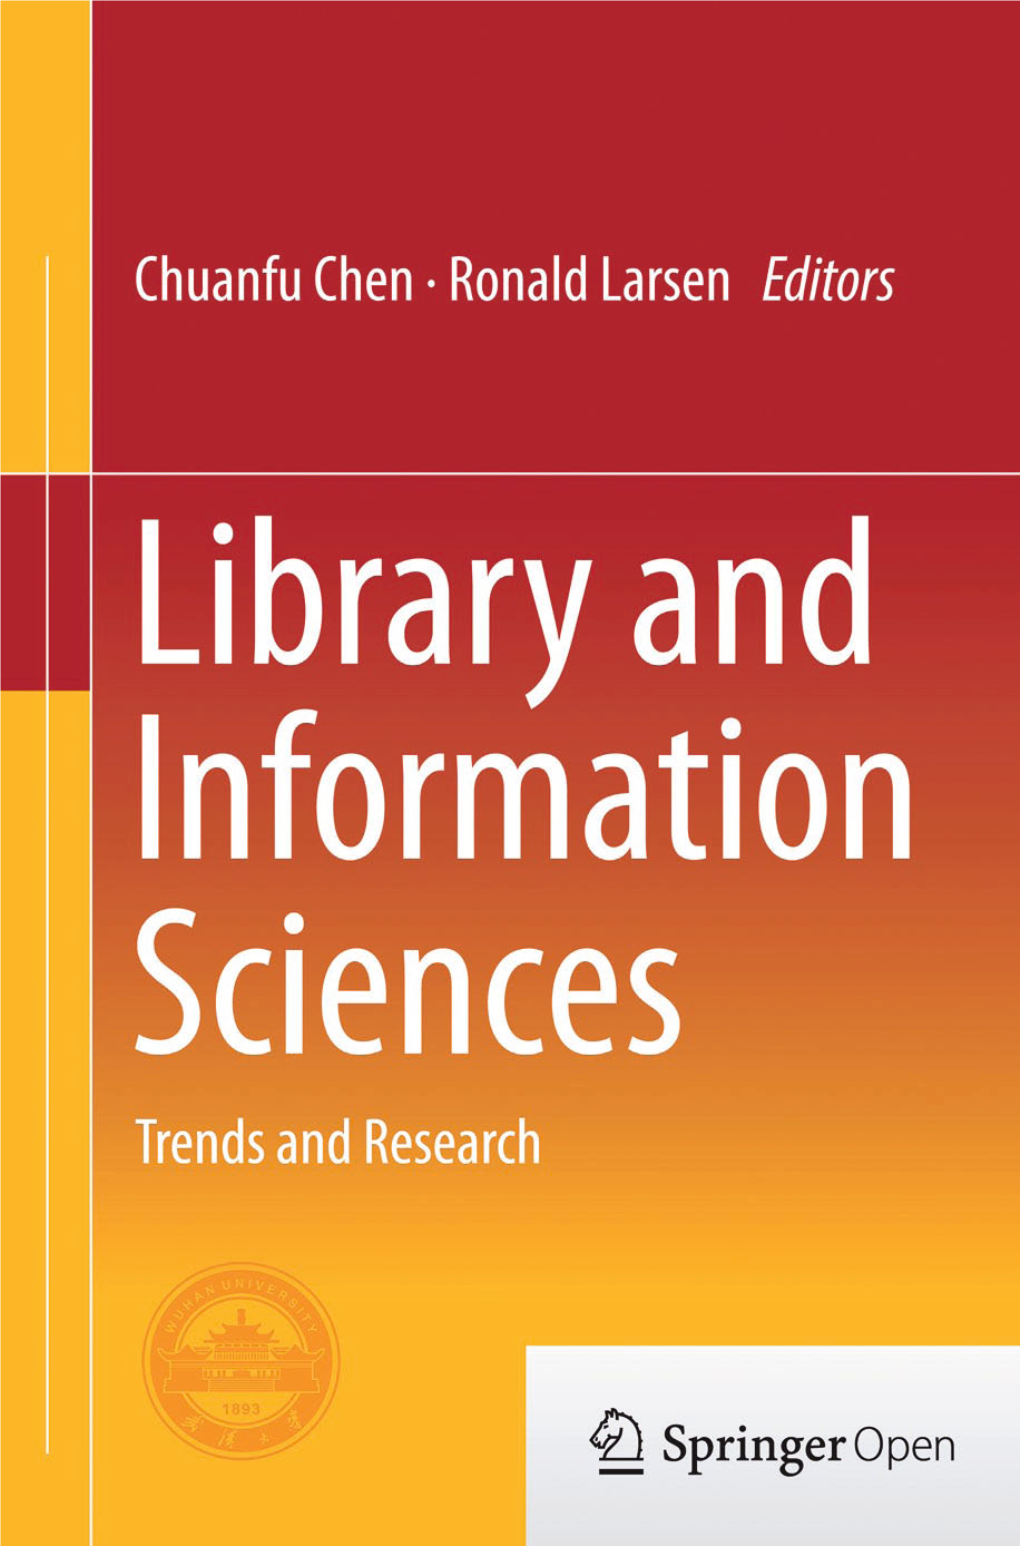 Library and Information Sciences Chuanfu Chen • Ronald Larsen Editors